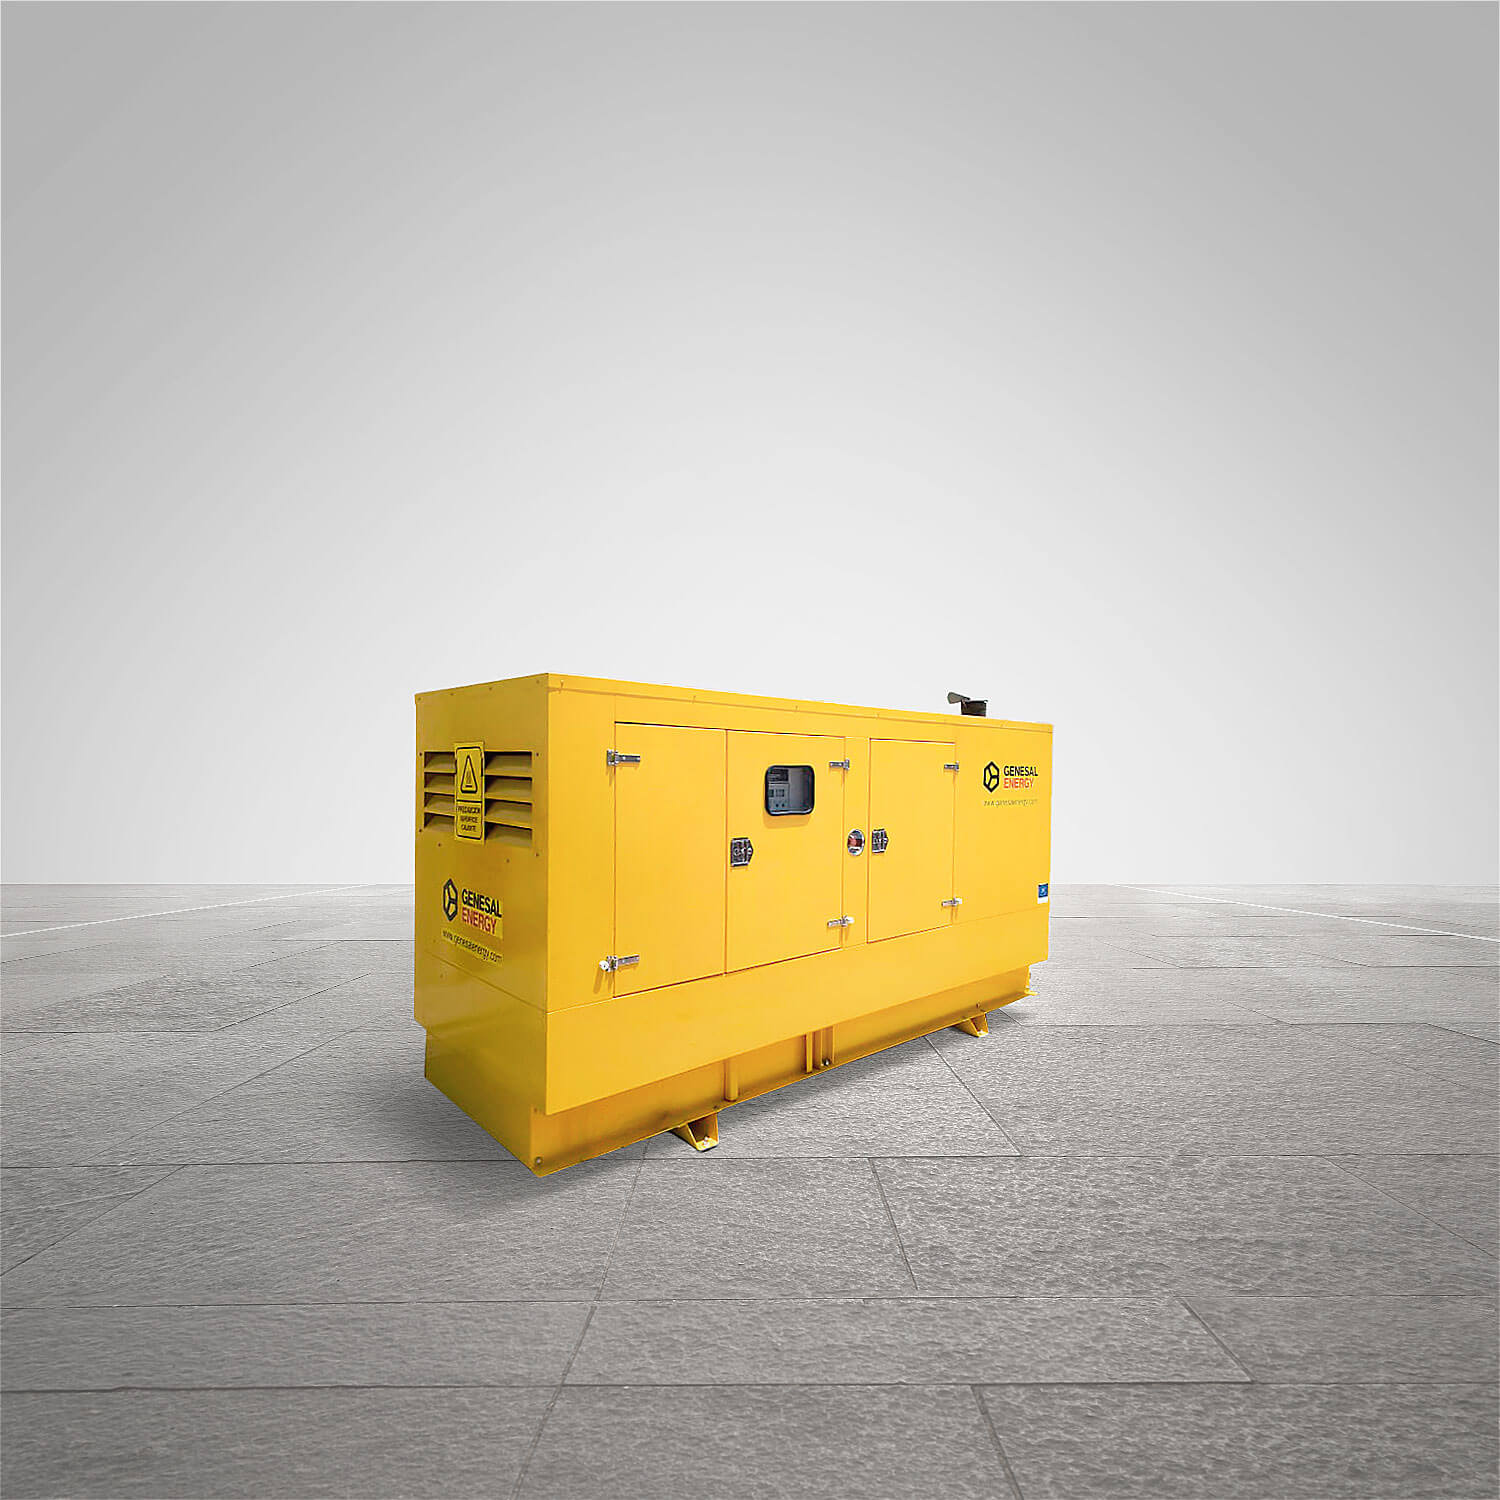 Supply of two generator sets for a photovoltaic power plant